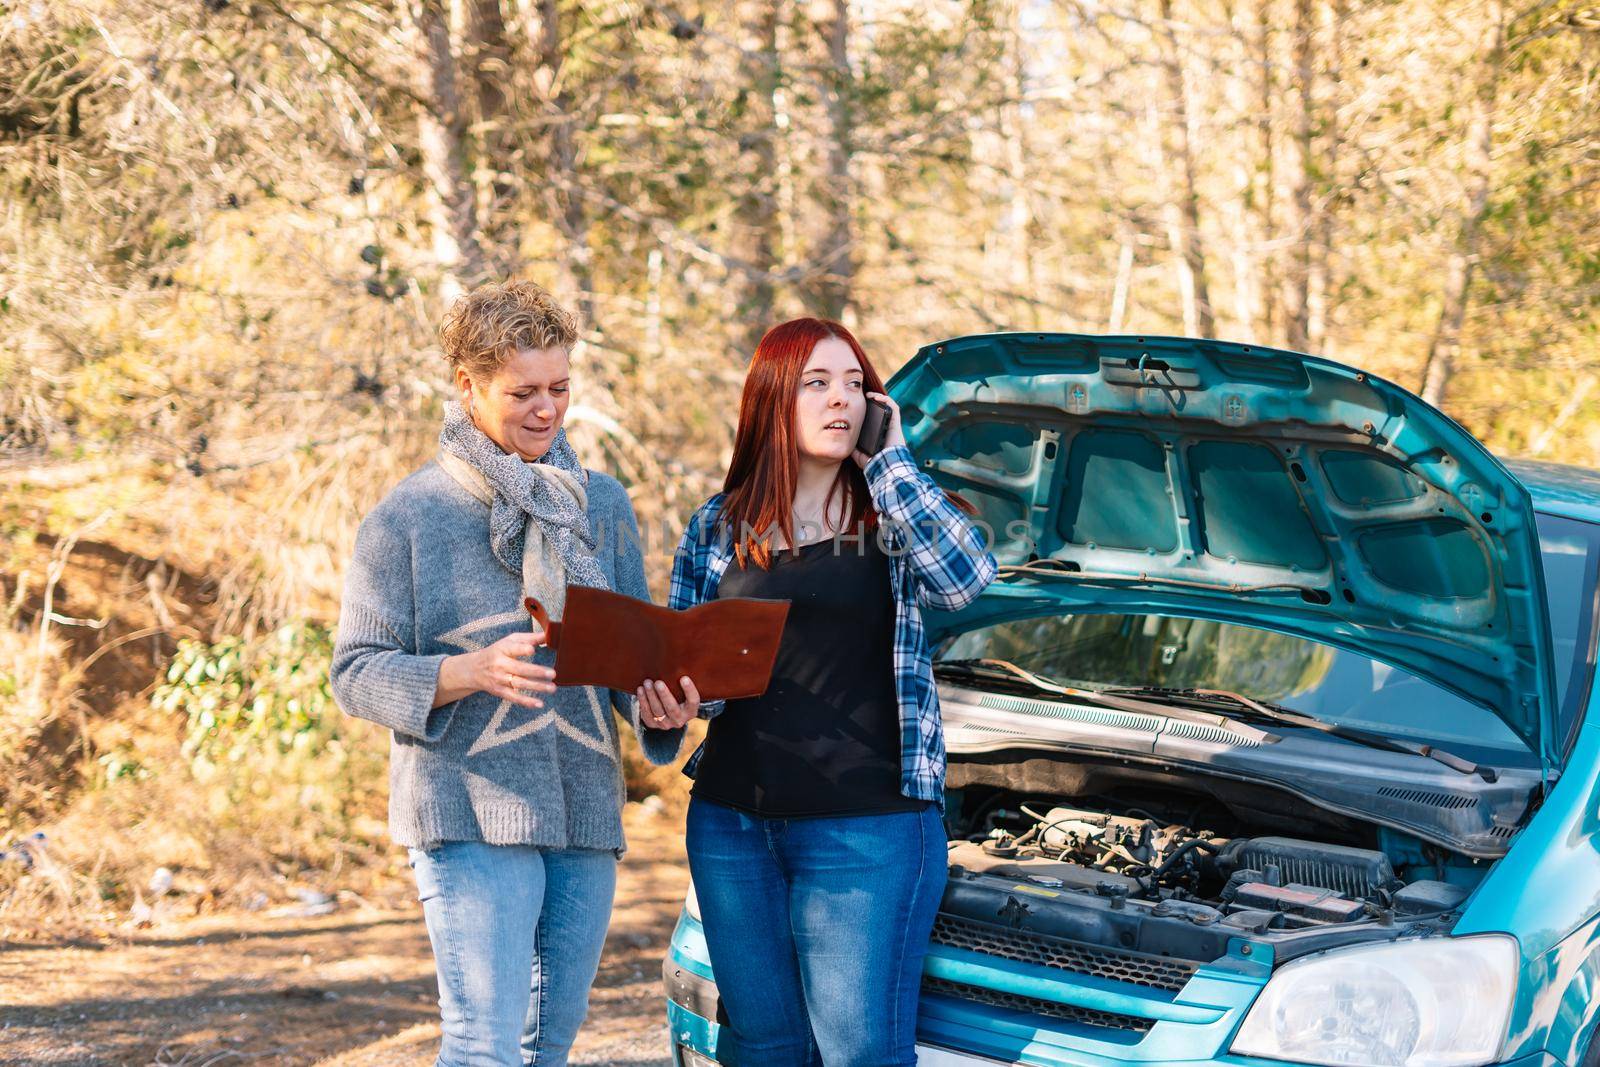 Mother and daughter standing next to the broken down vehicle checking the documents and calling the tow truck. Two friends on holiday have a car accident and have to call the mechanic in the middle of the road. Clear road on a very sunny day next to a forest in the background. Red-haired girl calling tow truck and blonde woman looking at insurance papers.